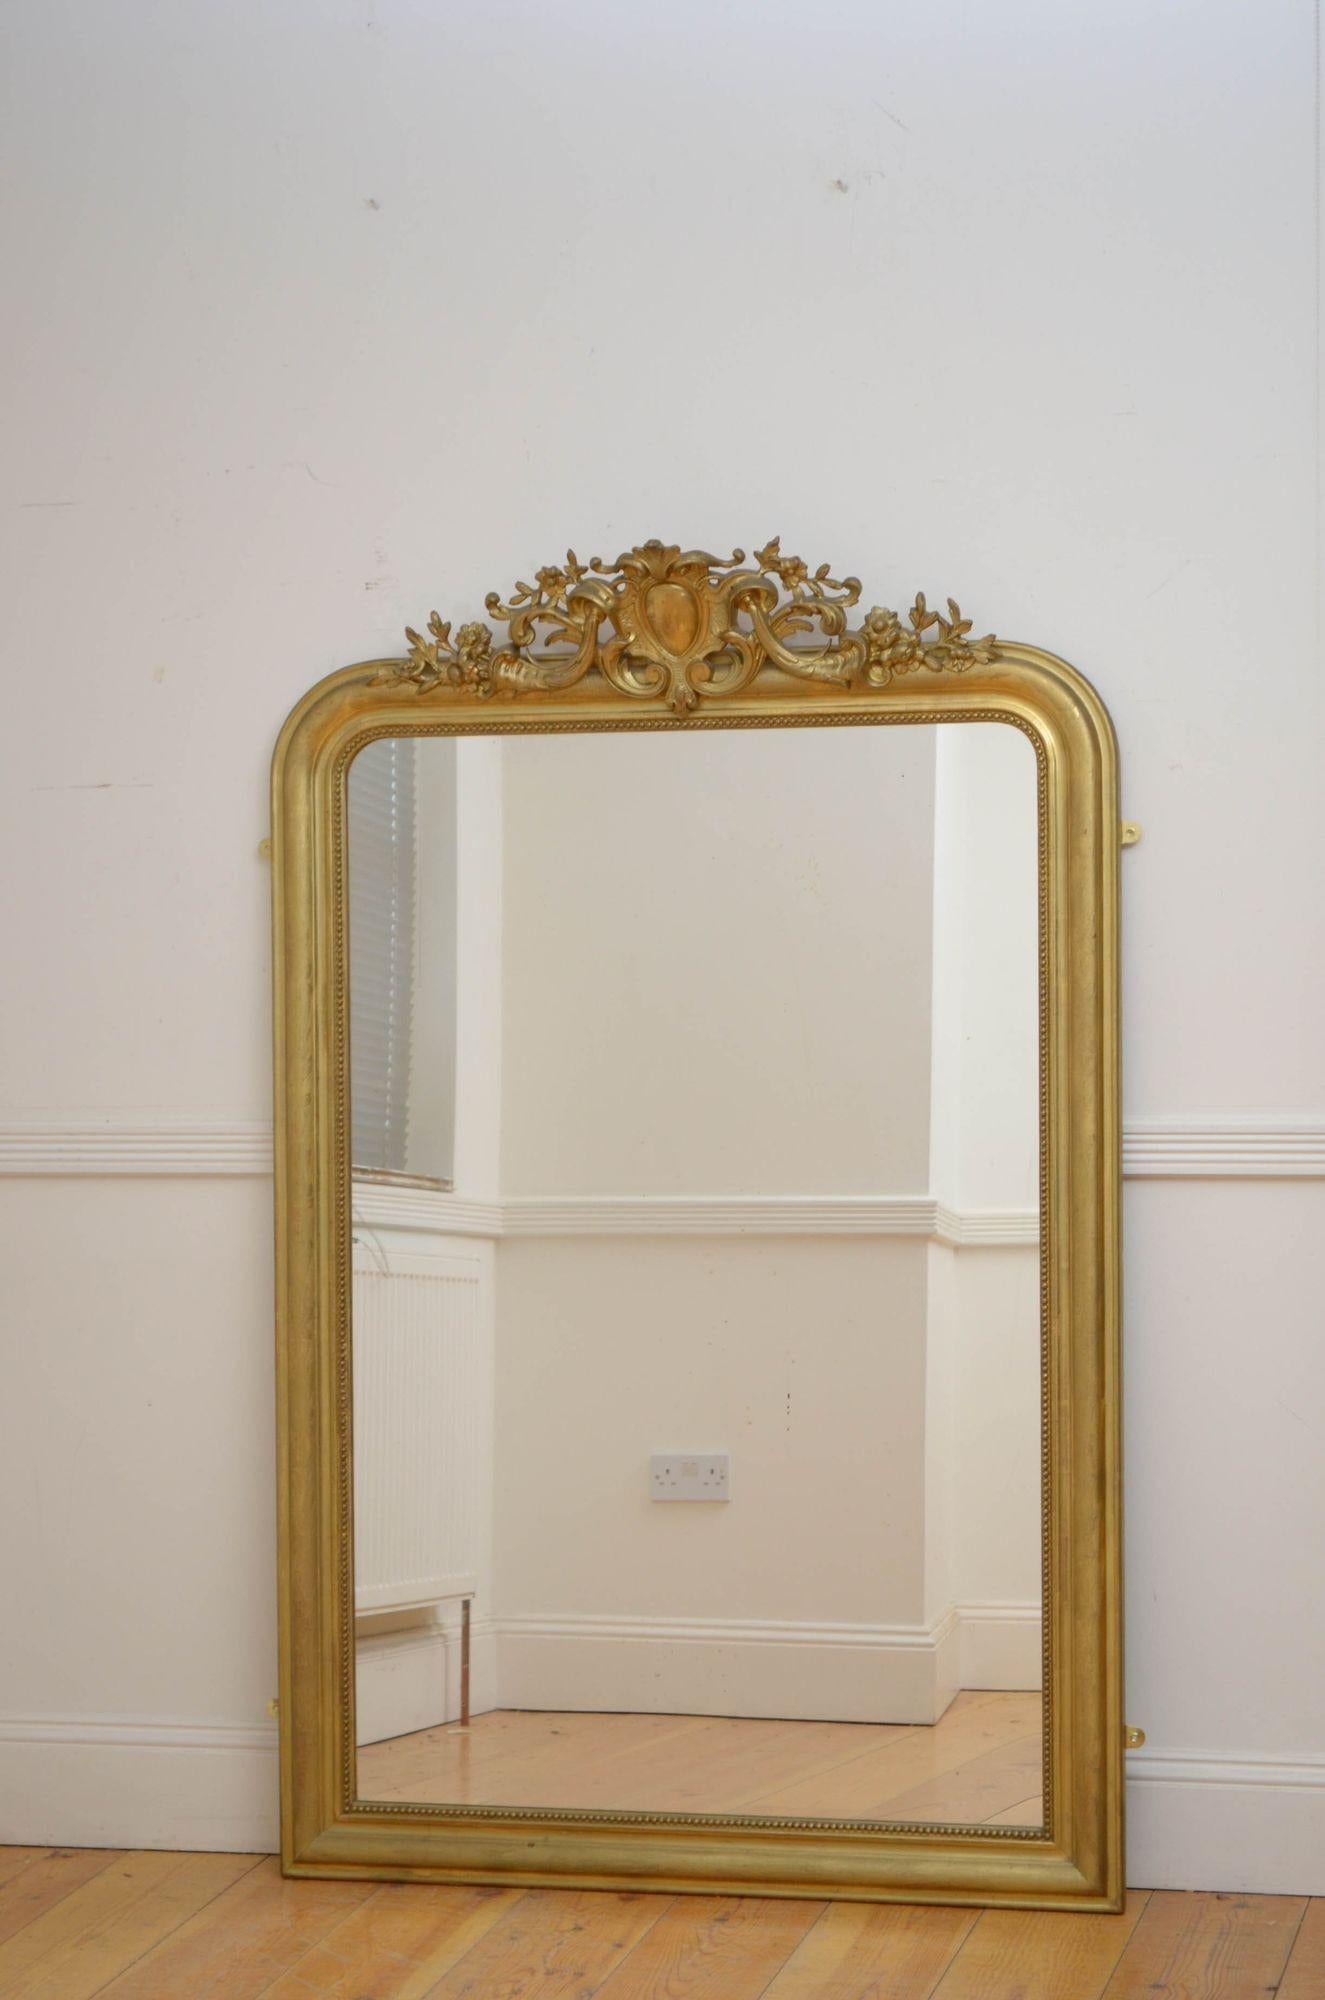 Sn5277 Superb French giltwood wall mirror, having original glass with some imperfections in beaded and gilded frame with and fabulous crest with scrolls and flowers to the centre and etched flowers decoration throughout. This antique mirror retains